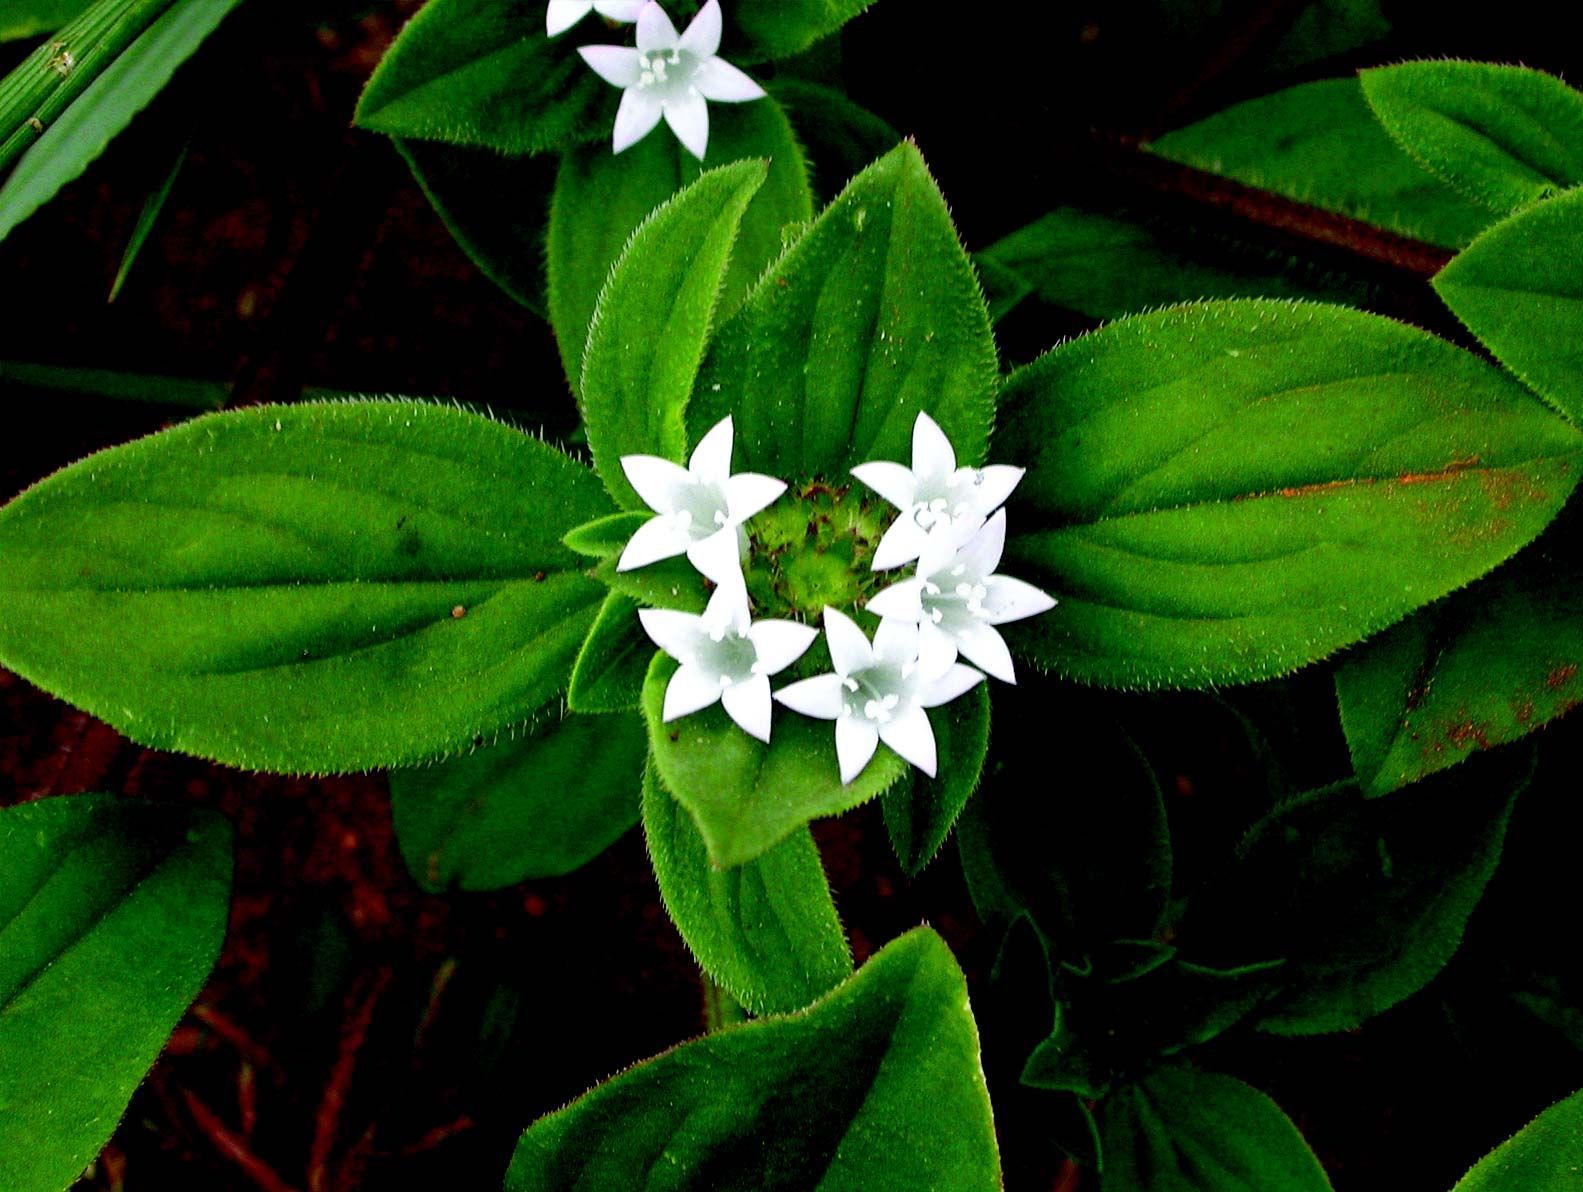 Image of Mexican clover